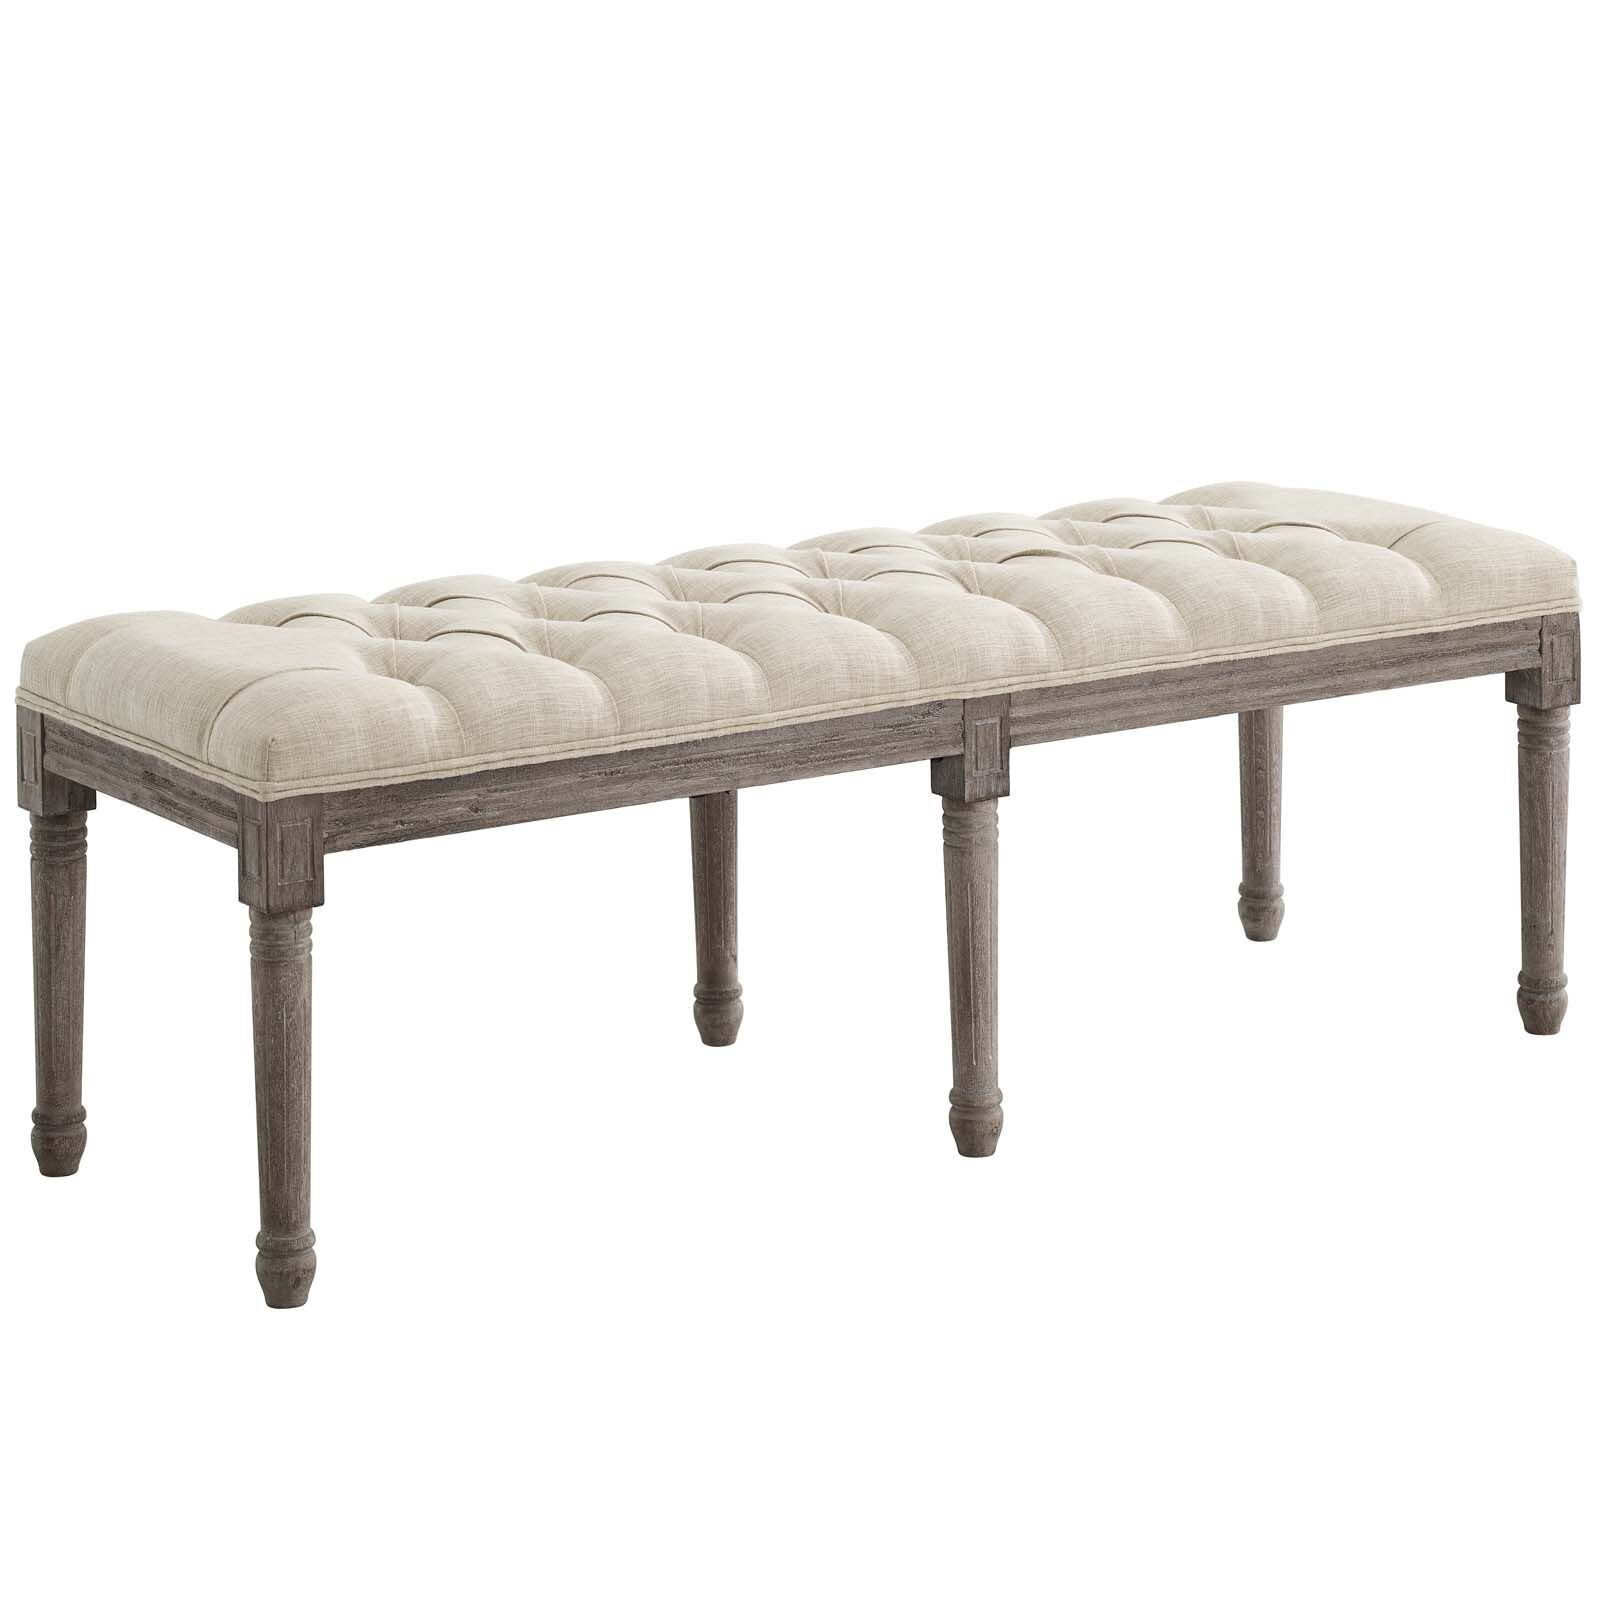 French Vintage Upholstered Fabric Bench, Beige.jpeg